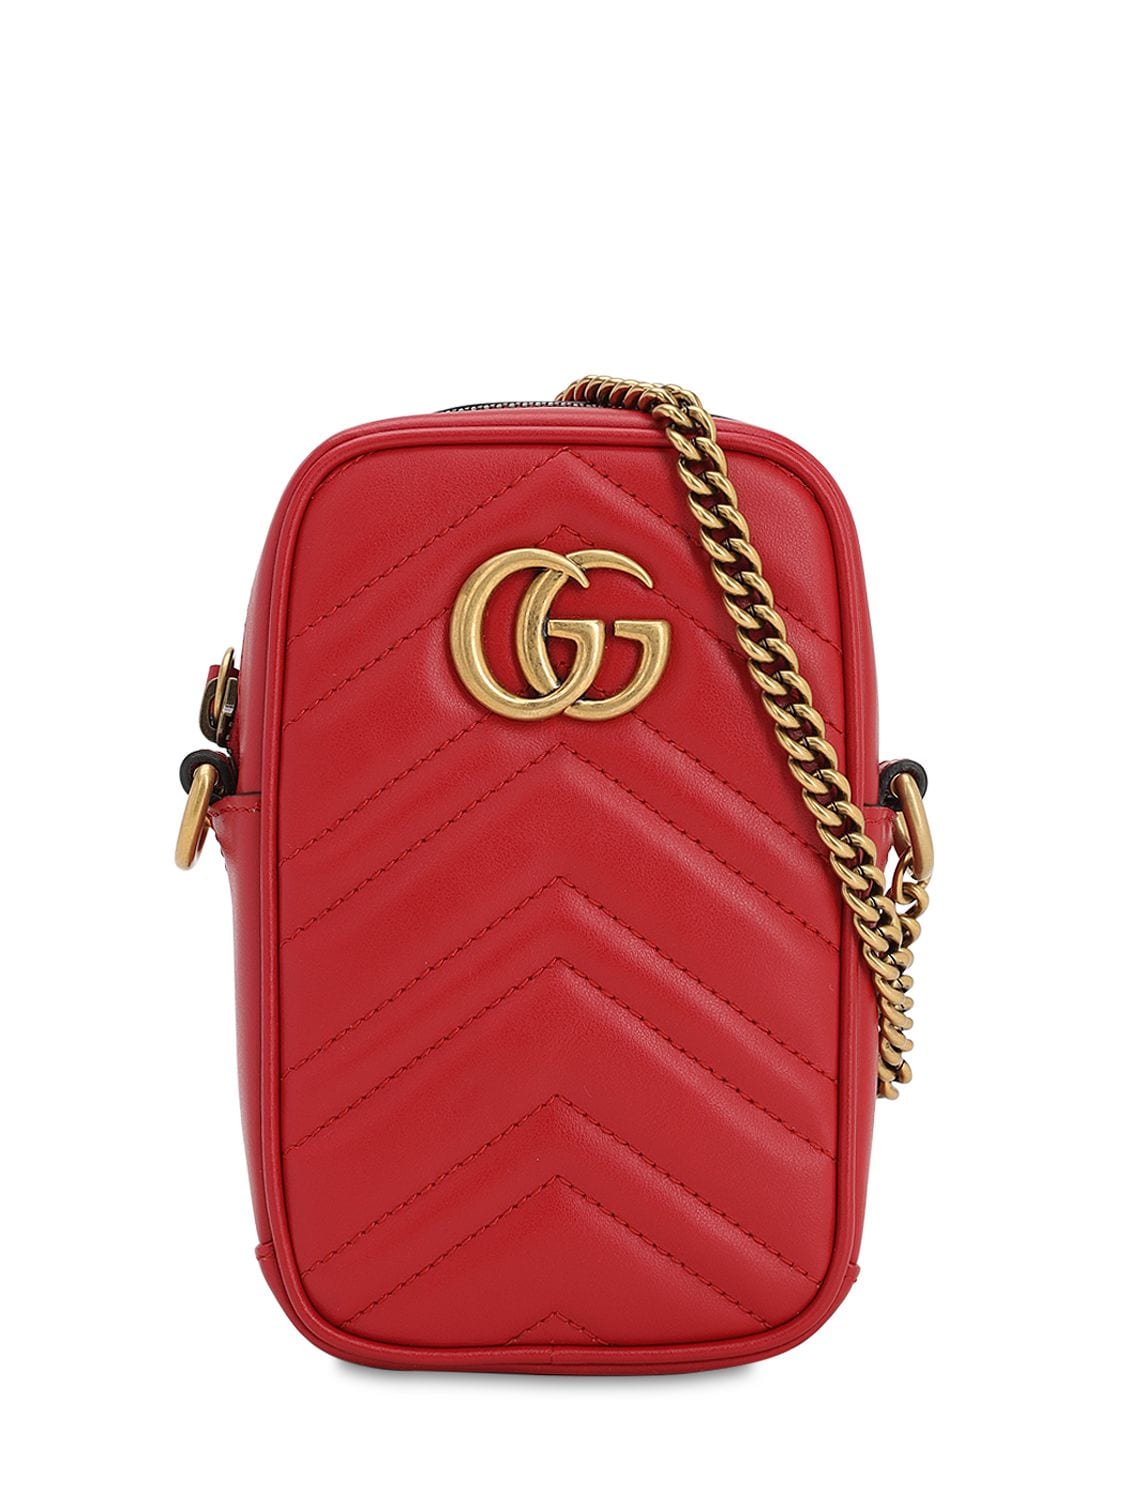 Gucci Gg Marmont 2.0 Leather Shoulder Bag In Ibiscus Red